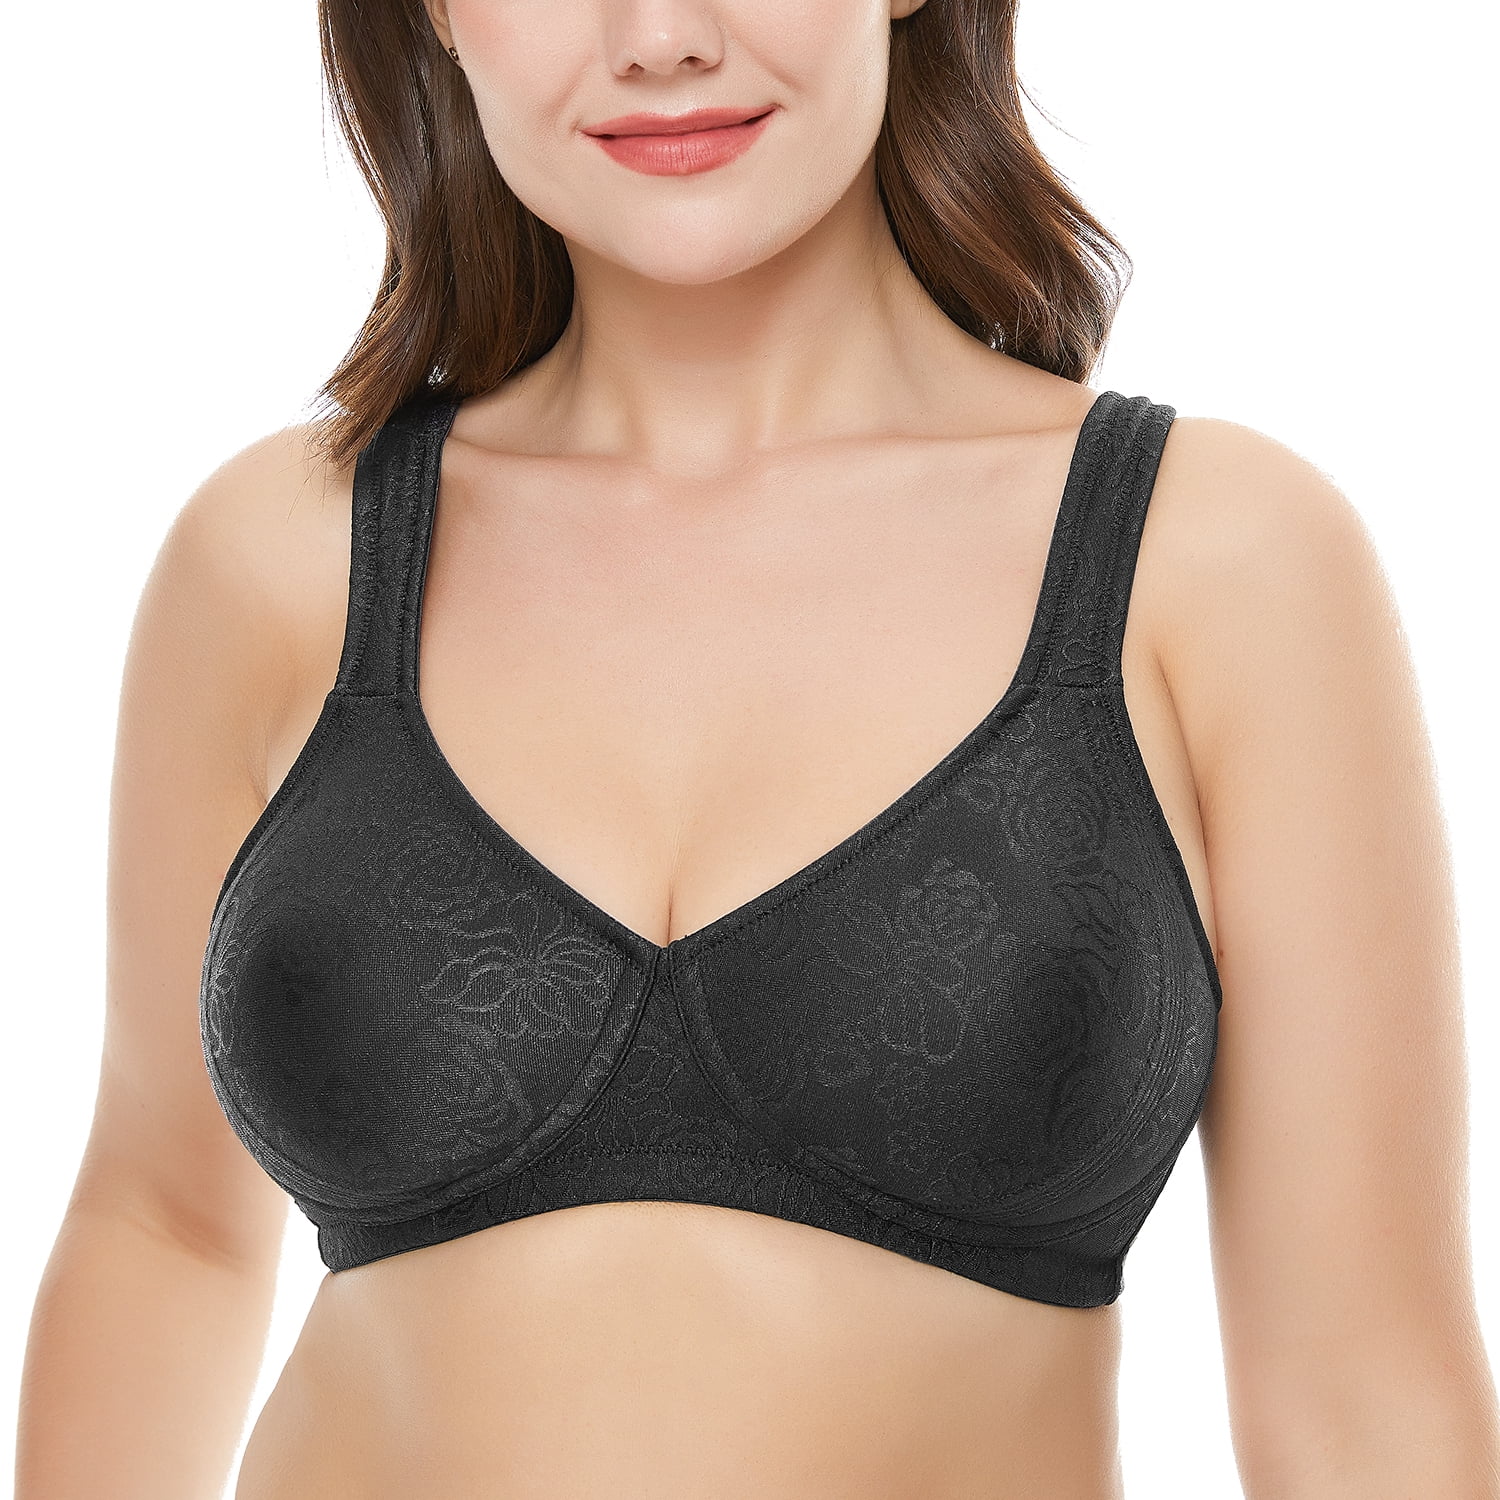 Aufmer Clearance Wireless Bras for Women Support Plus Ladies Large